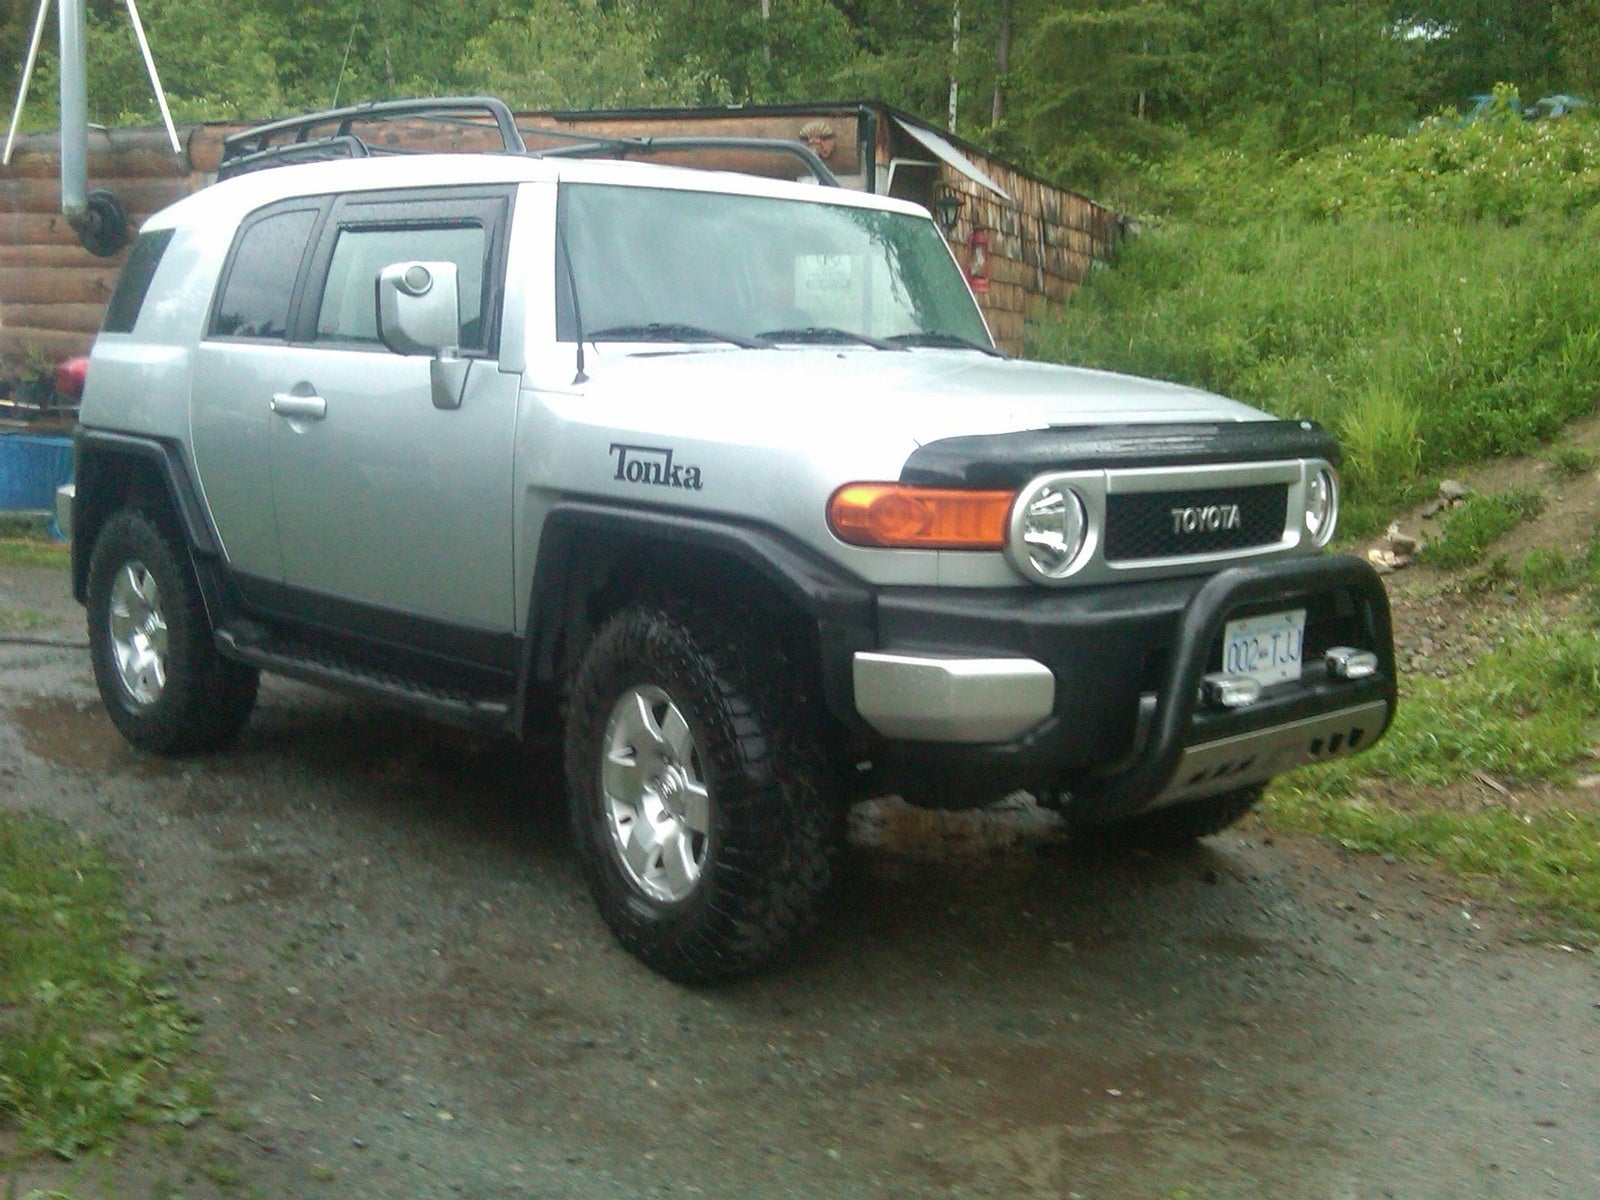 What Gas Mileage Does The Fj Cruiser Get